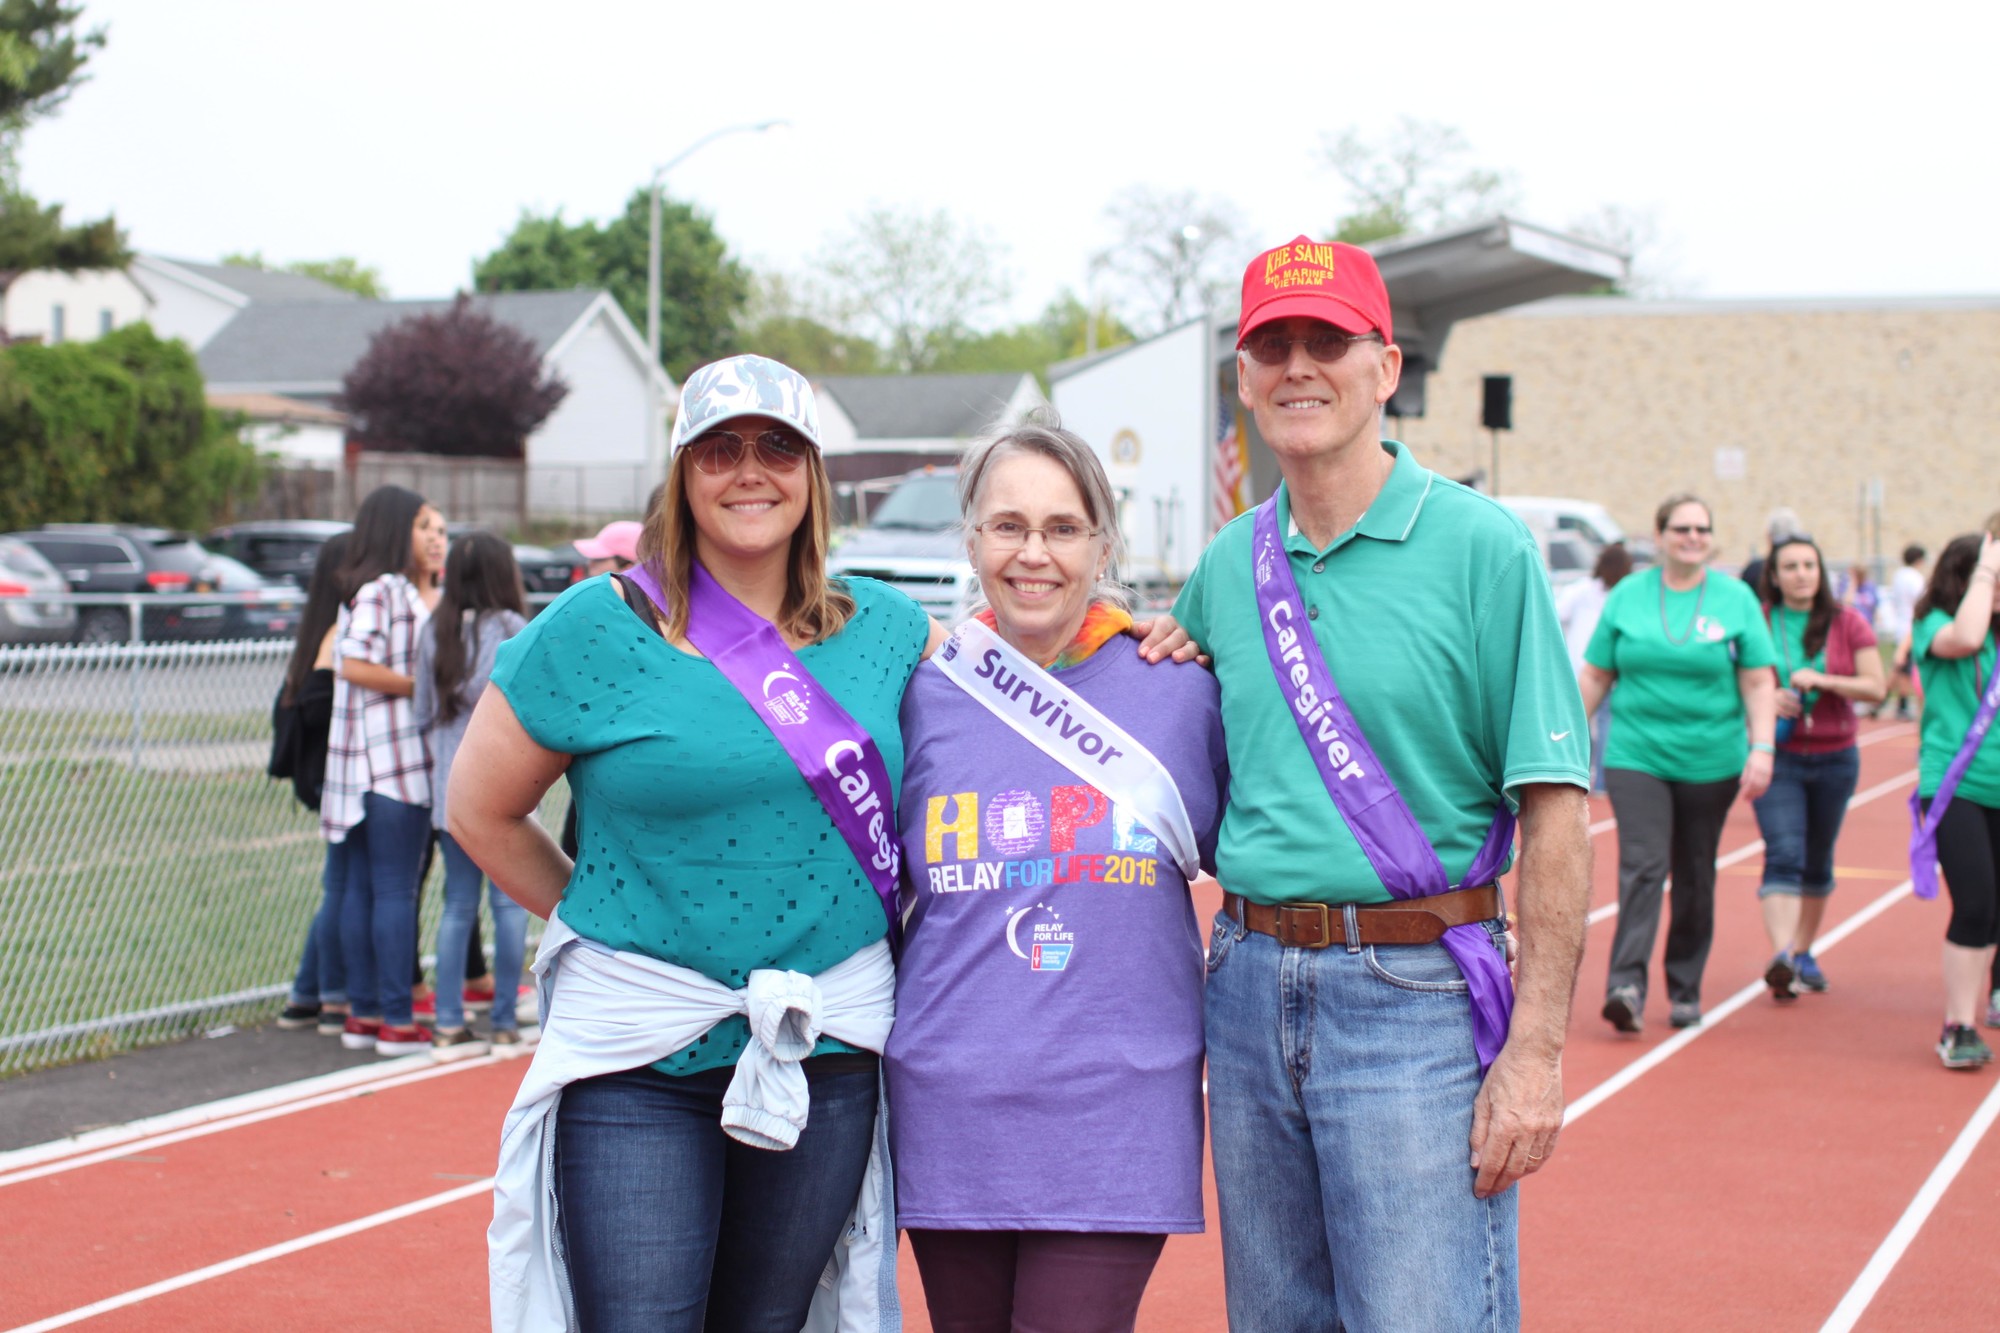 Lynn Slattery, survivor, poses for a picture with her husband Robert and daughter Heather after completing the caregiver lap.